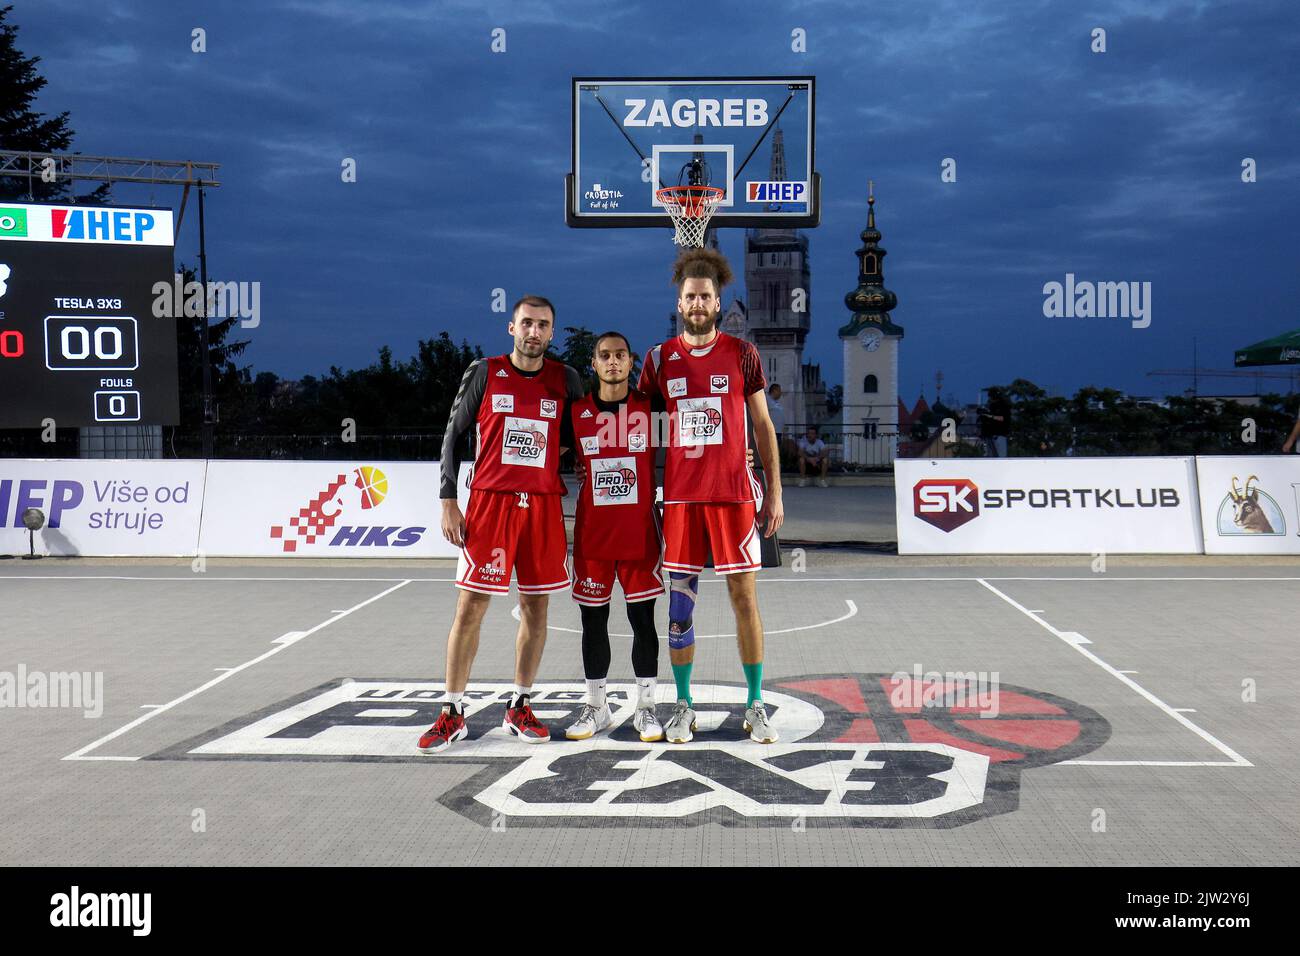 FIBA 3x3 Quest tournament held at Upper town in Zagreb, Croatia on September 2, 2022